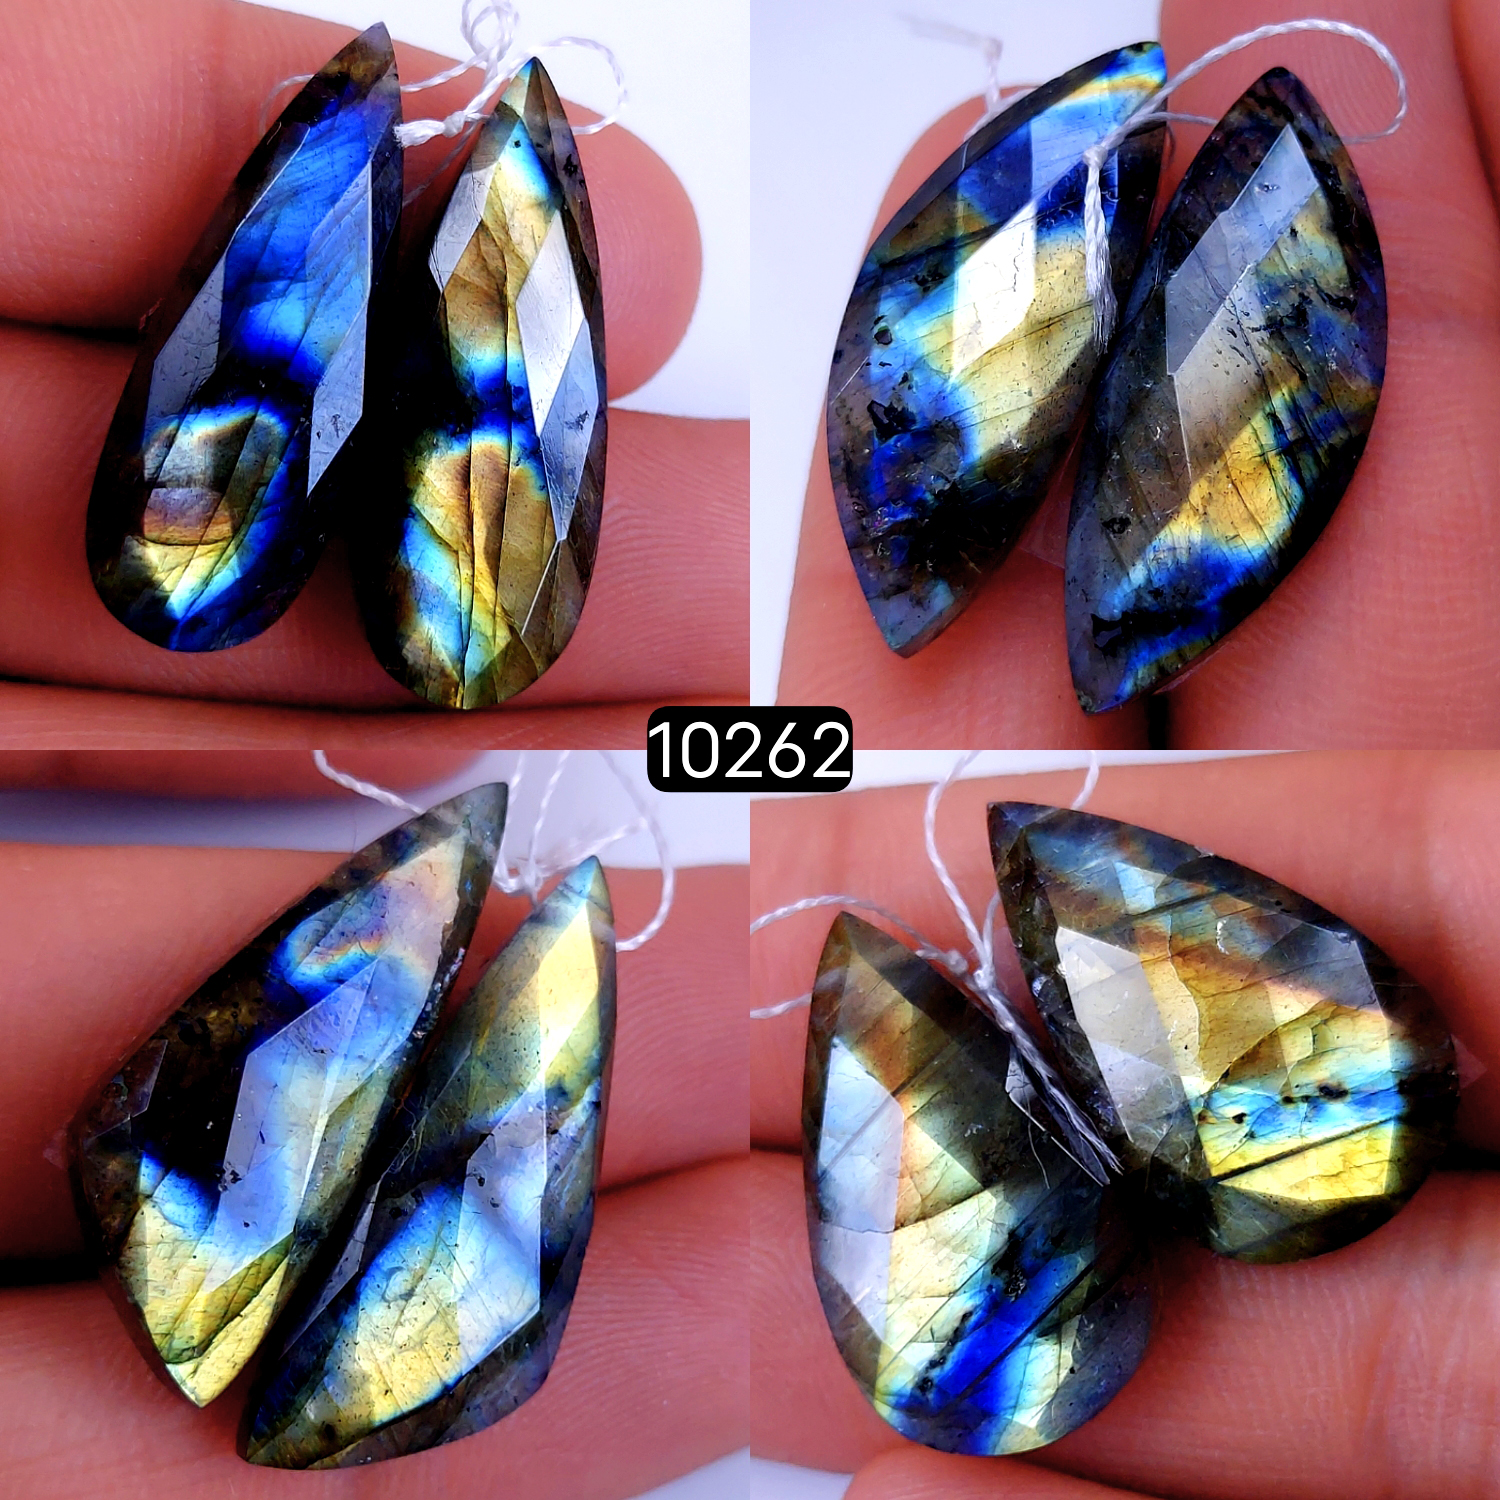 4Pair 130Cts Natural Labradorite Faceted Crystal Drill Dangle Drop Earring Pairs Silver Earrings Rose cut Labradorite Hoop Jewelry  30X12 25X15mm #10262